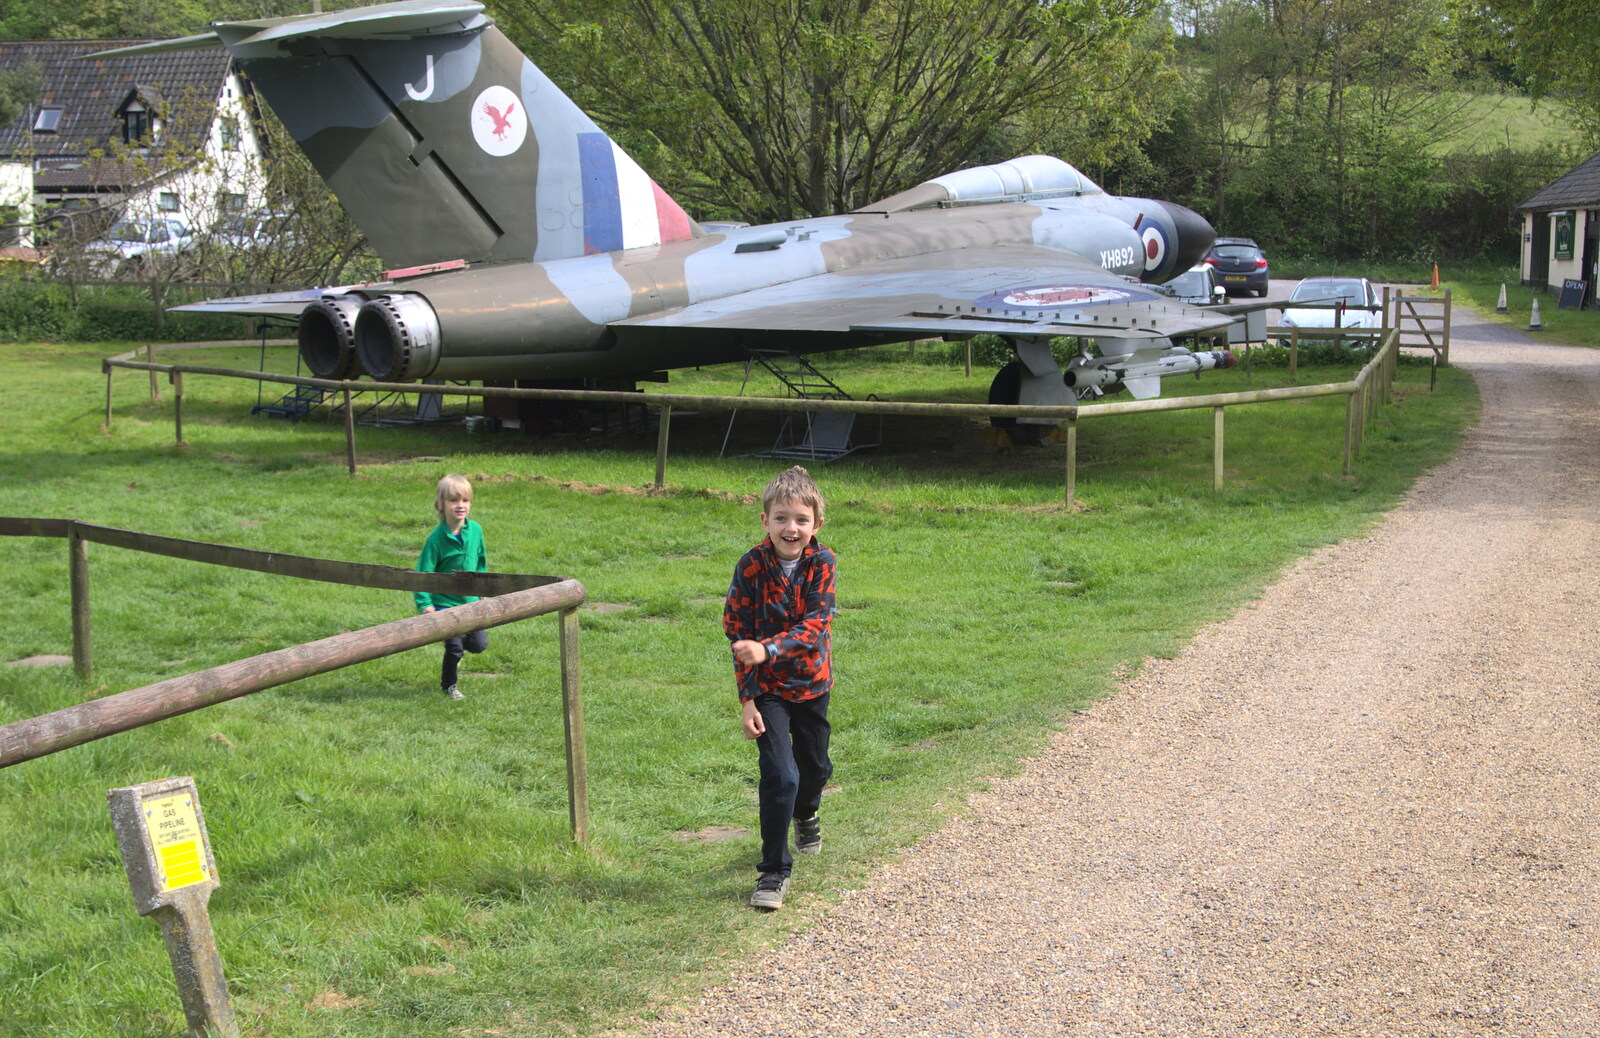 Harry and Fred run around at Flixton from Norfolk and Suffolk Aviation Museum, Flixton, Suffolk - 30th April 2017